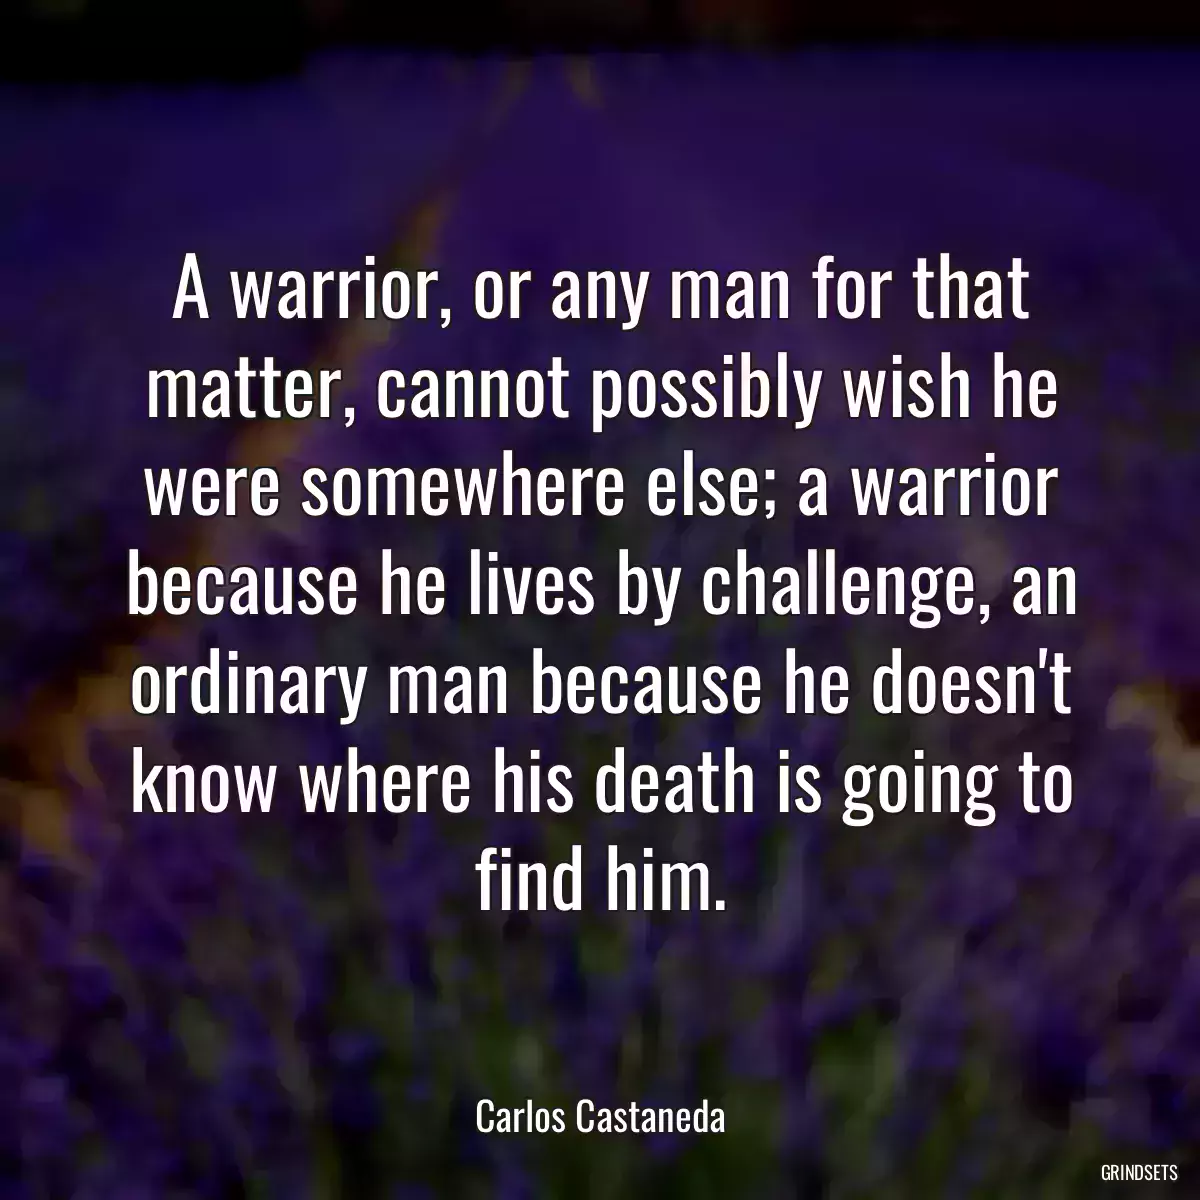 A warrior, or any man for that matter, cannot possibly wish he were somewhere else; a warrior because he lives by challenge, an ordinary man because he doesn\'t know where his death is going to find him.